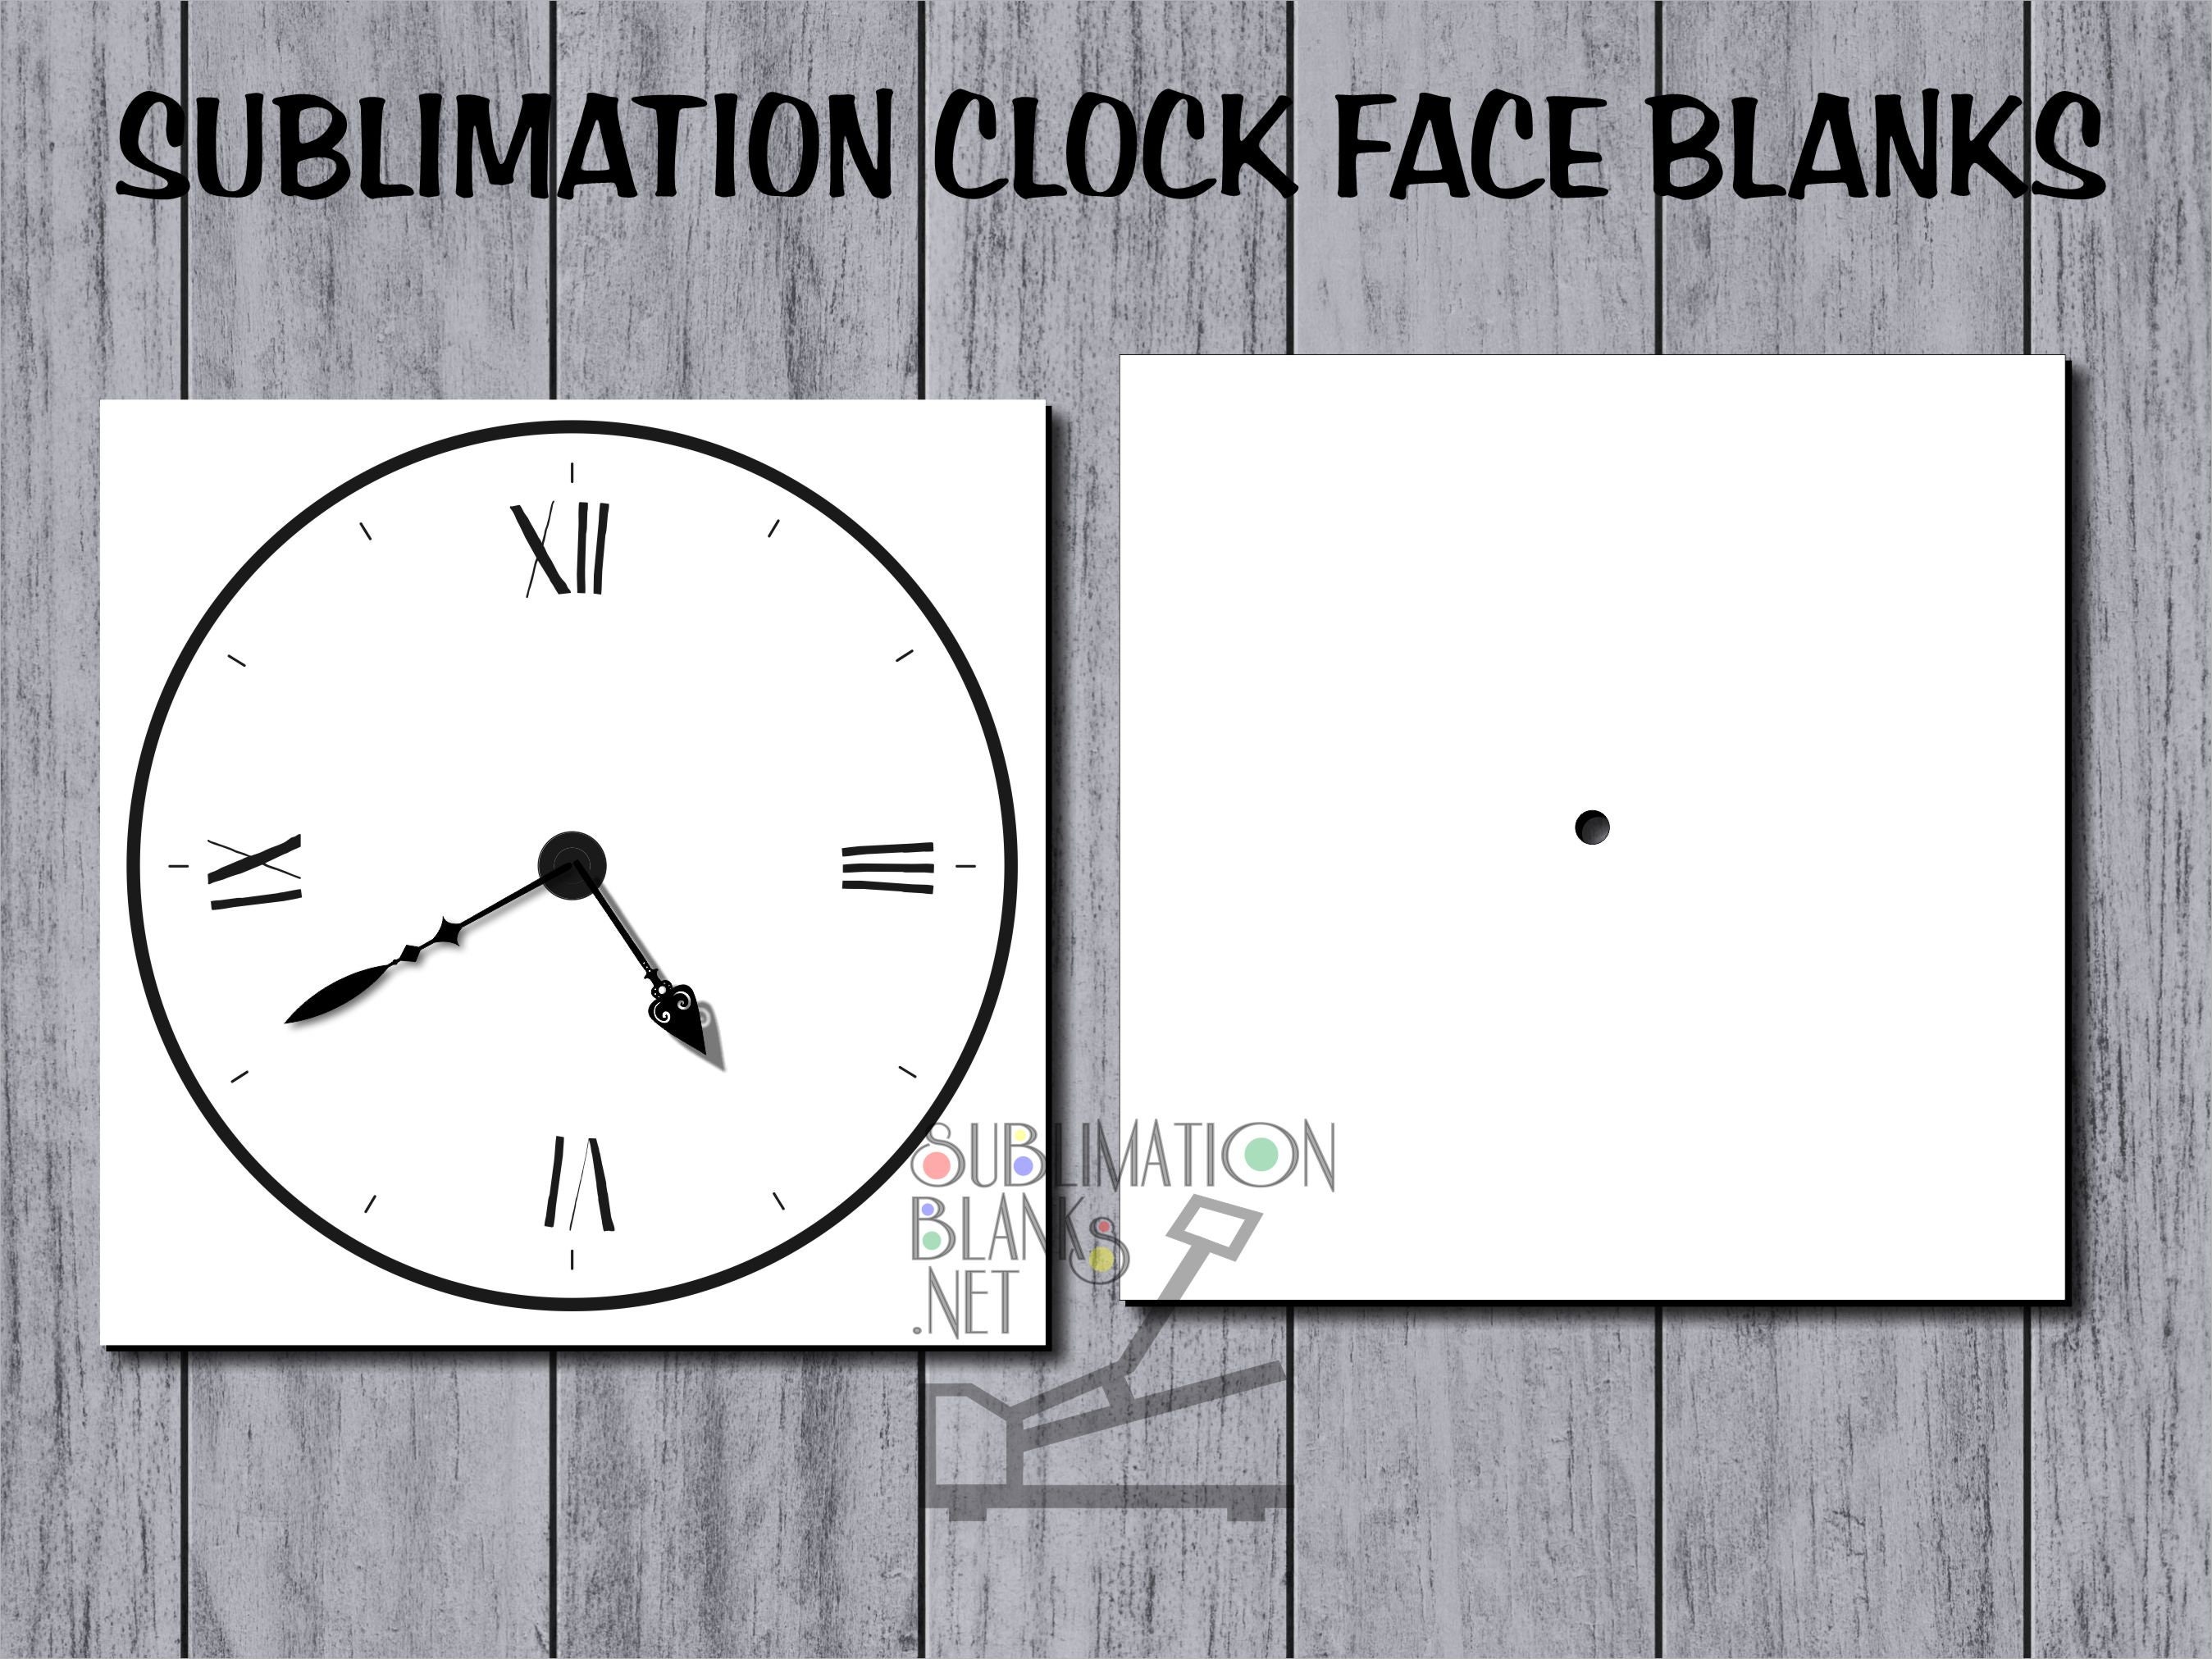 SQUARE Pointed Corners CLOCK FACE, Sublimation Blanks Blanks for Sublimation  Diy Wall Decor Wall Clock Home Decor Custom Personalized Clock 